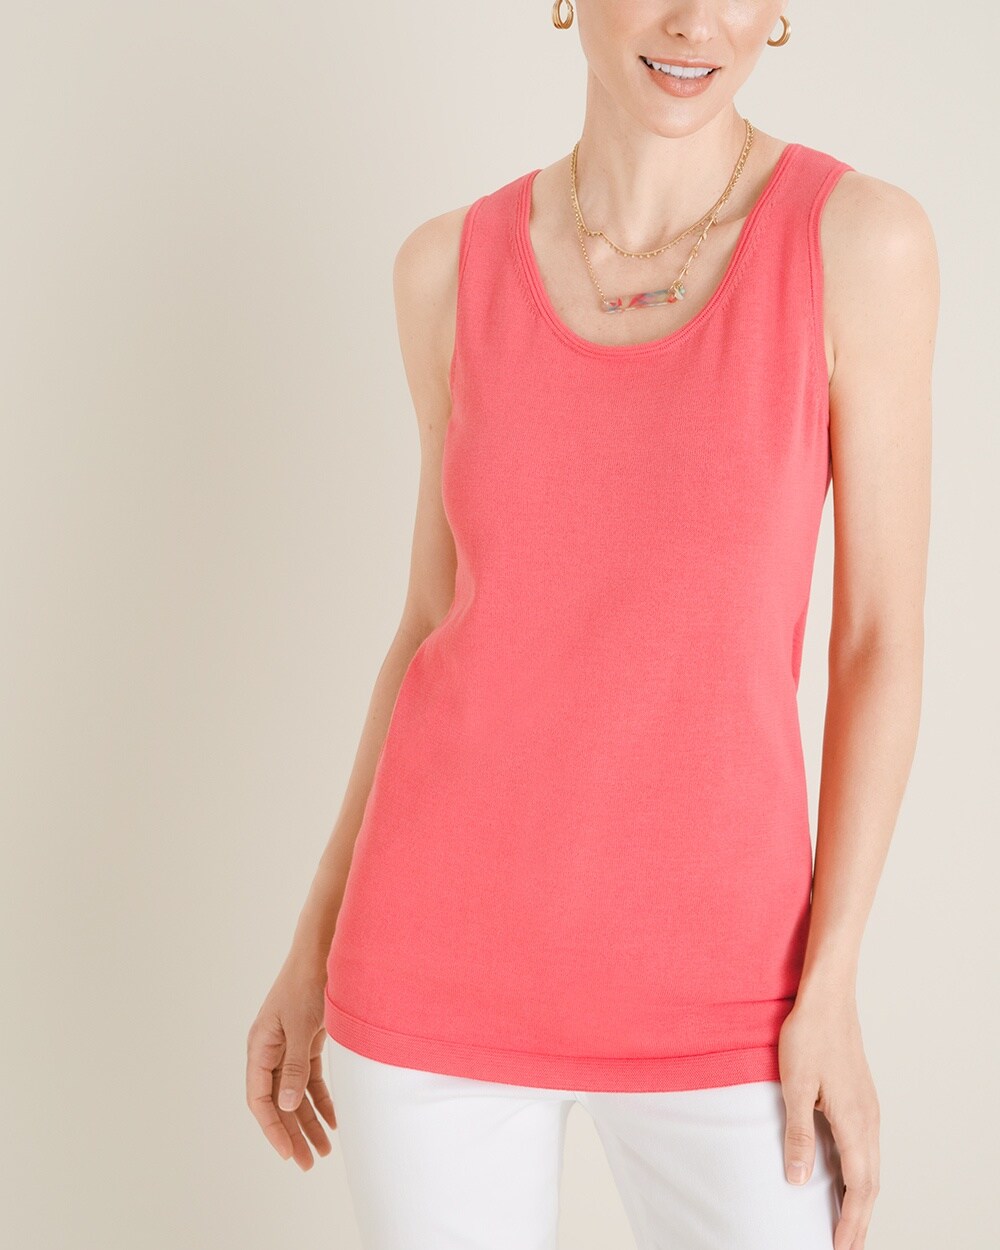 The Everyday Sweater Tank